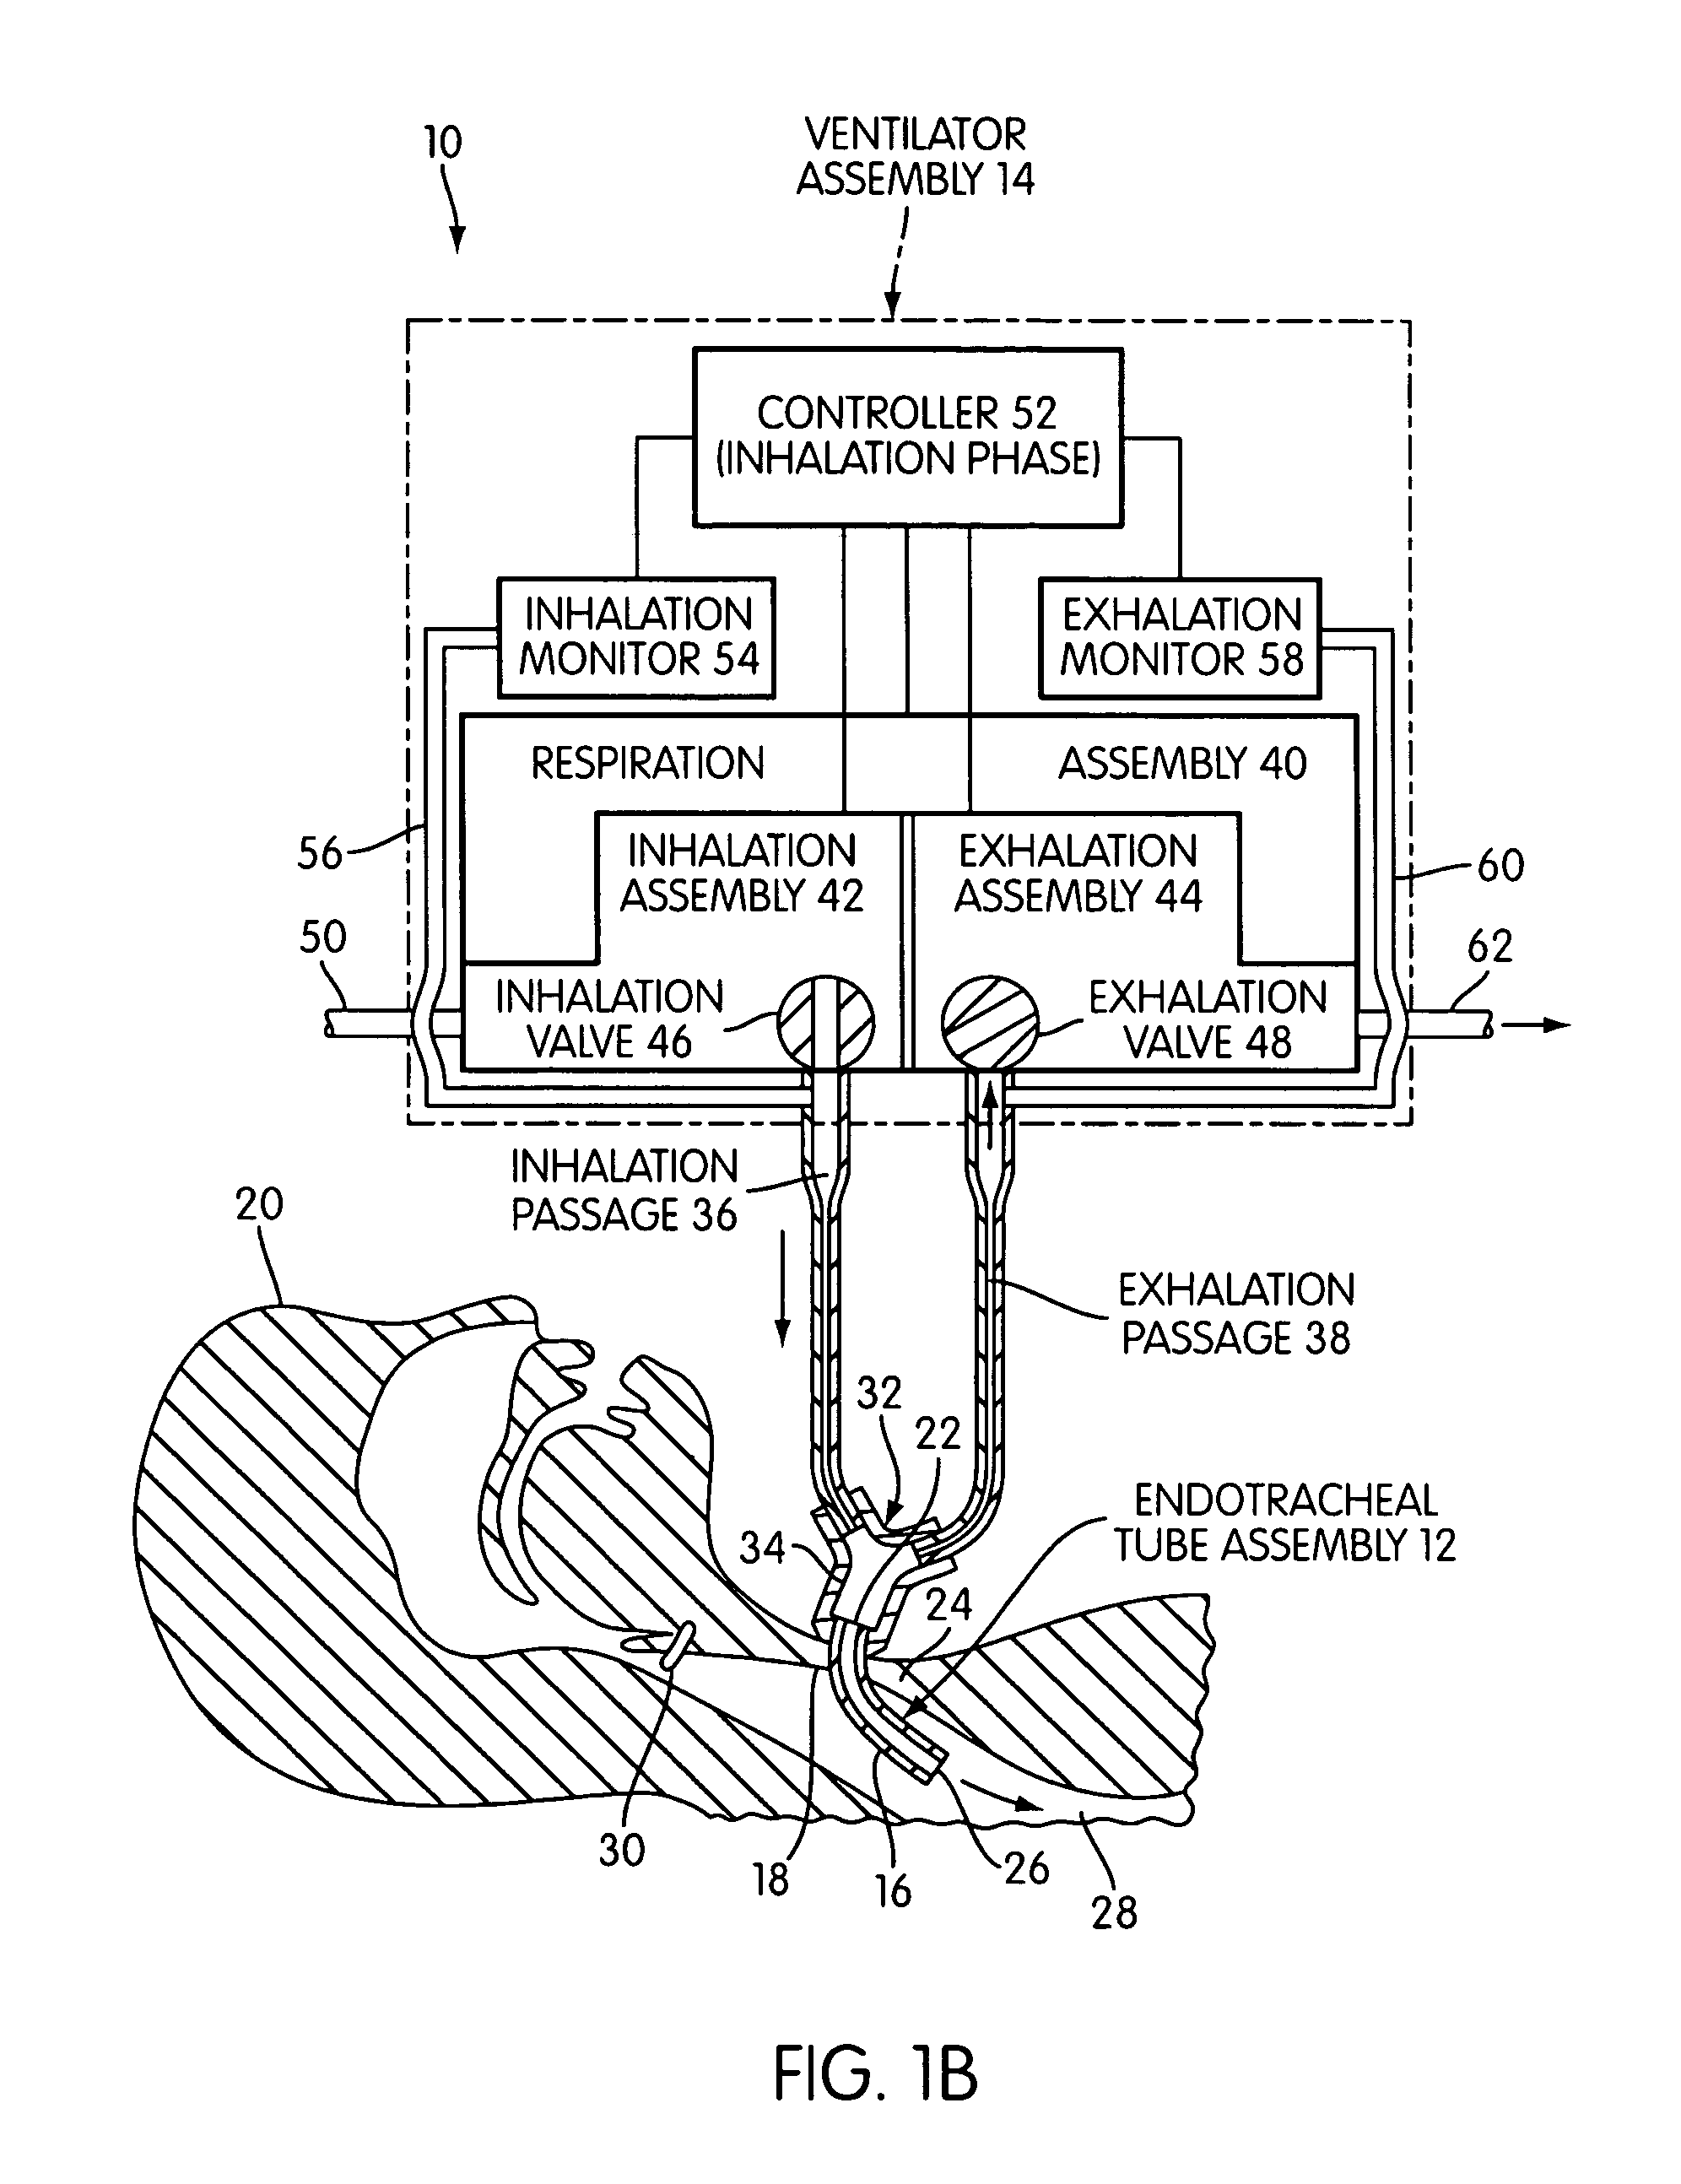 Ventilating apparatus and method enabling a patient to talk with or without a trachostomy tube check valve